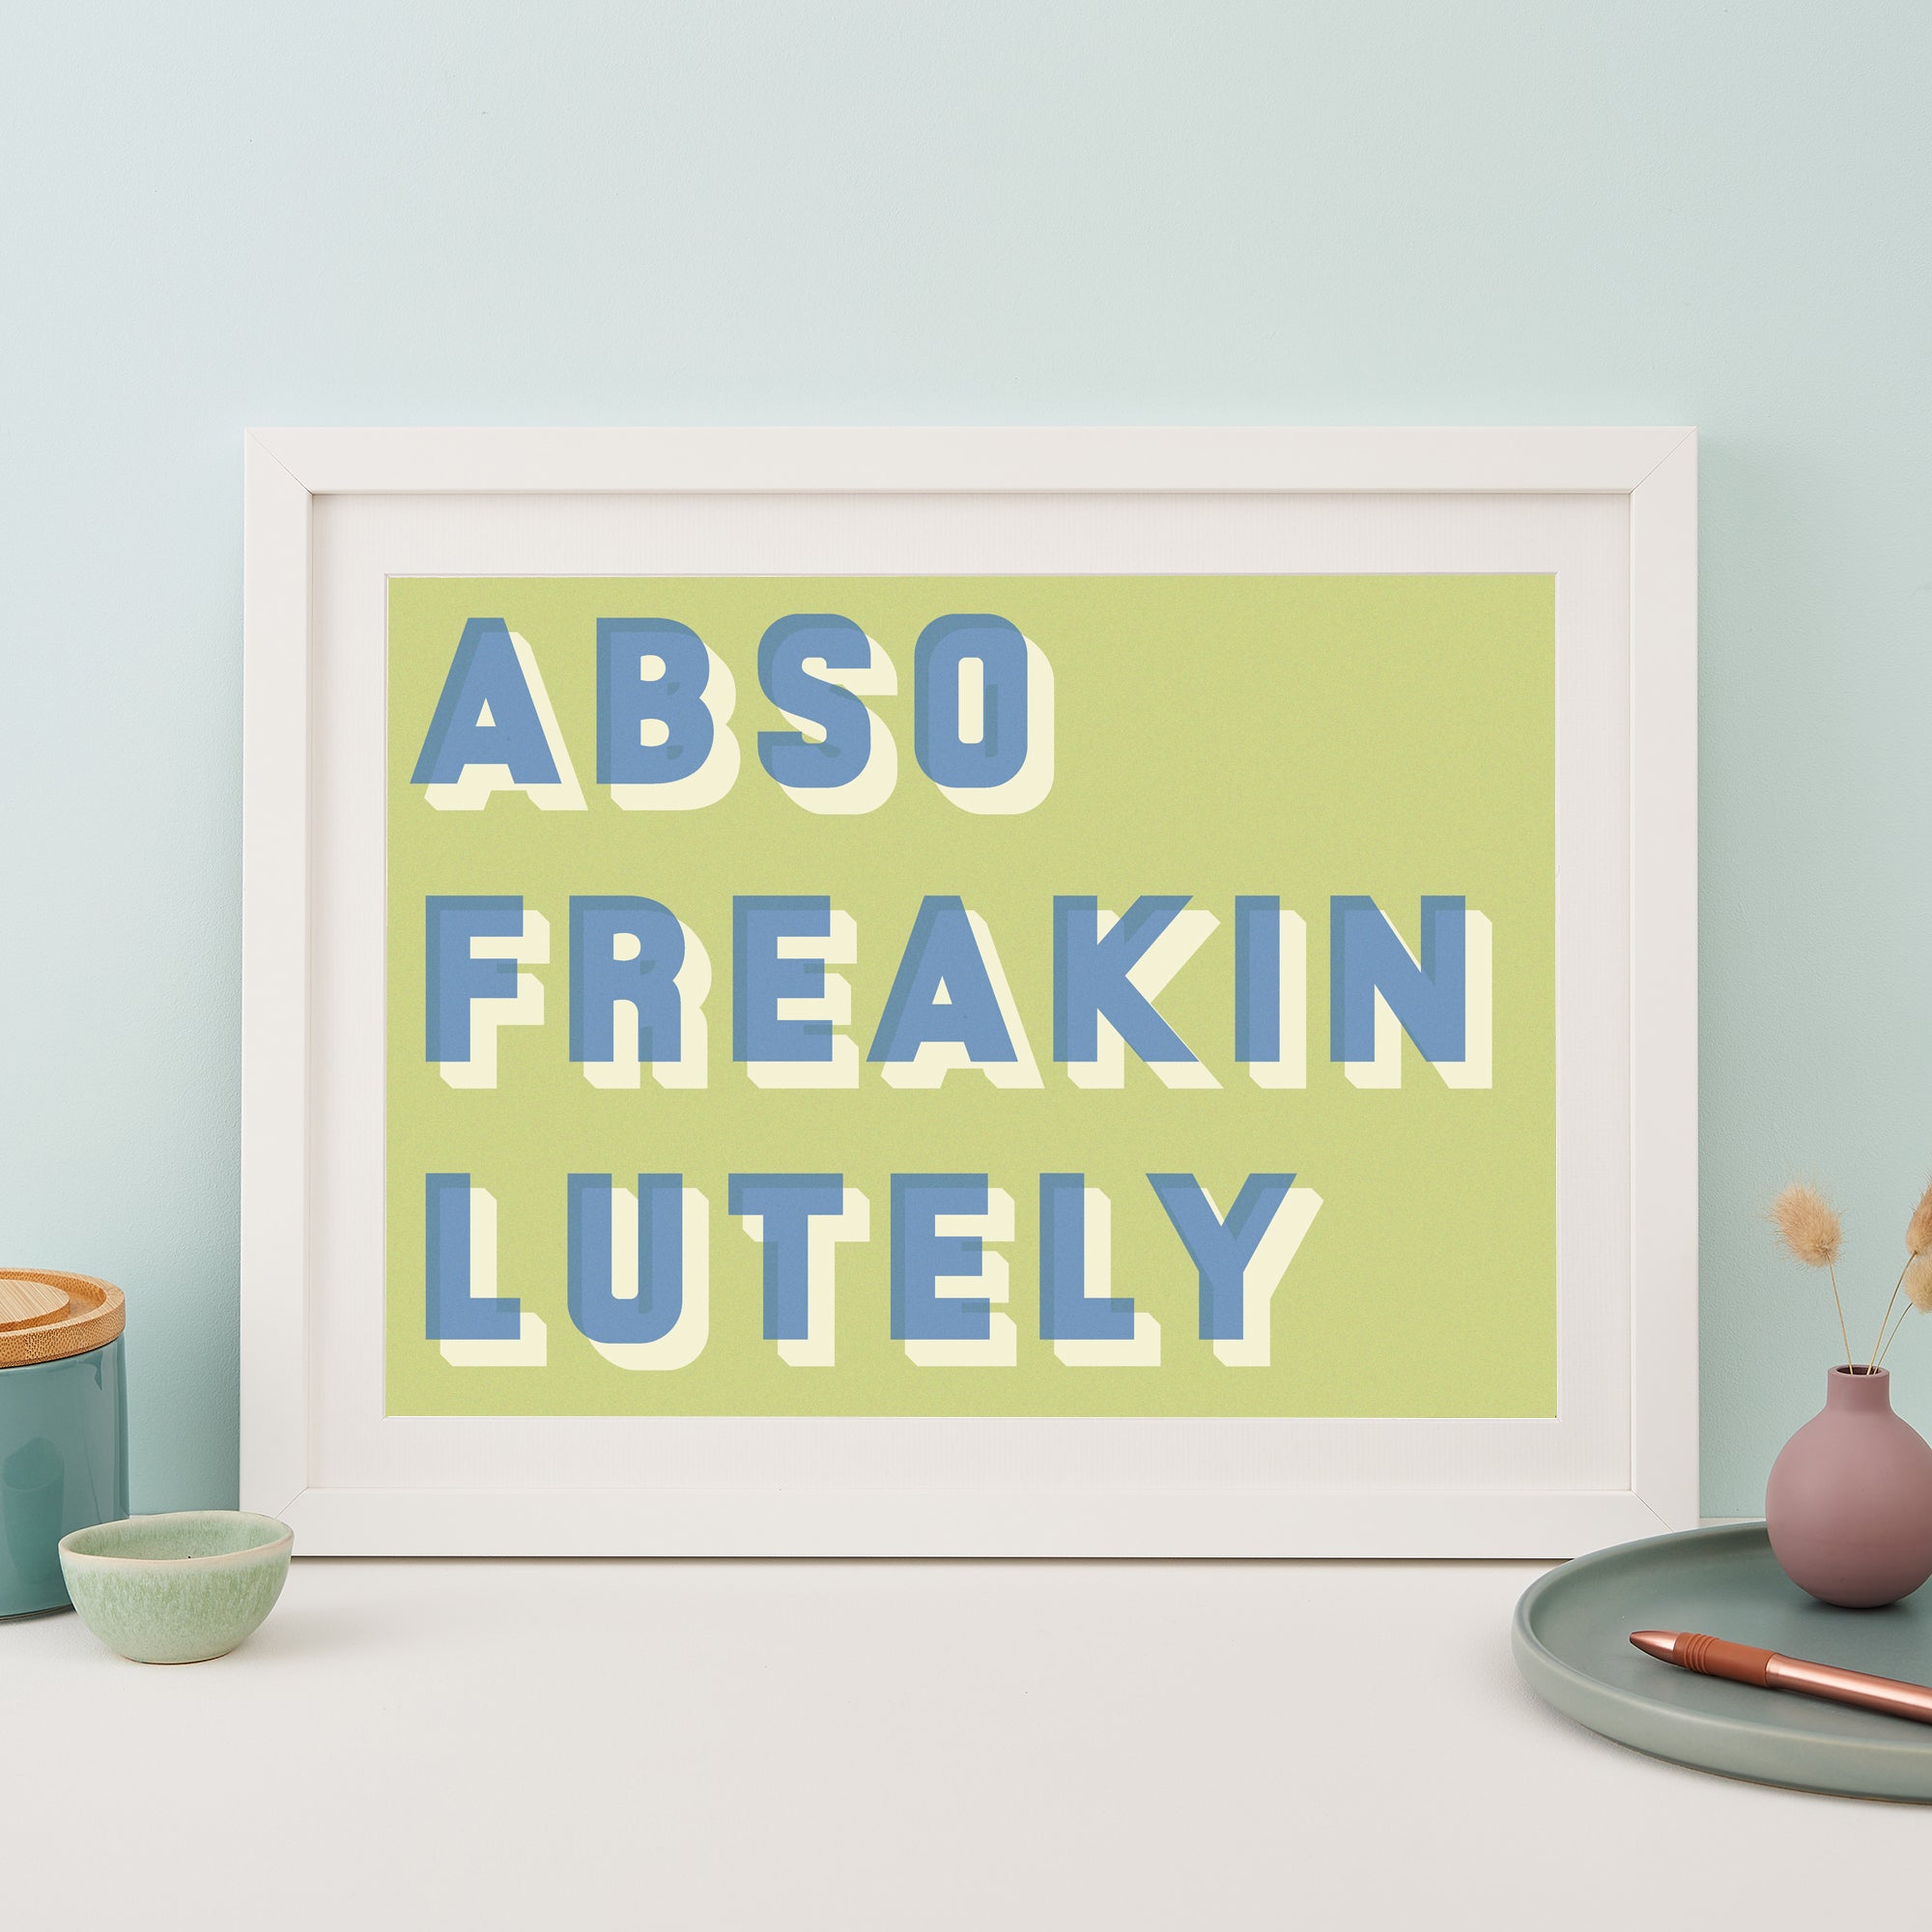 White framed typographic print saying Abso Freakin Lutely on a green background